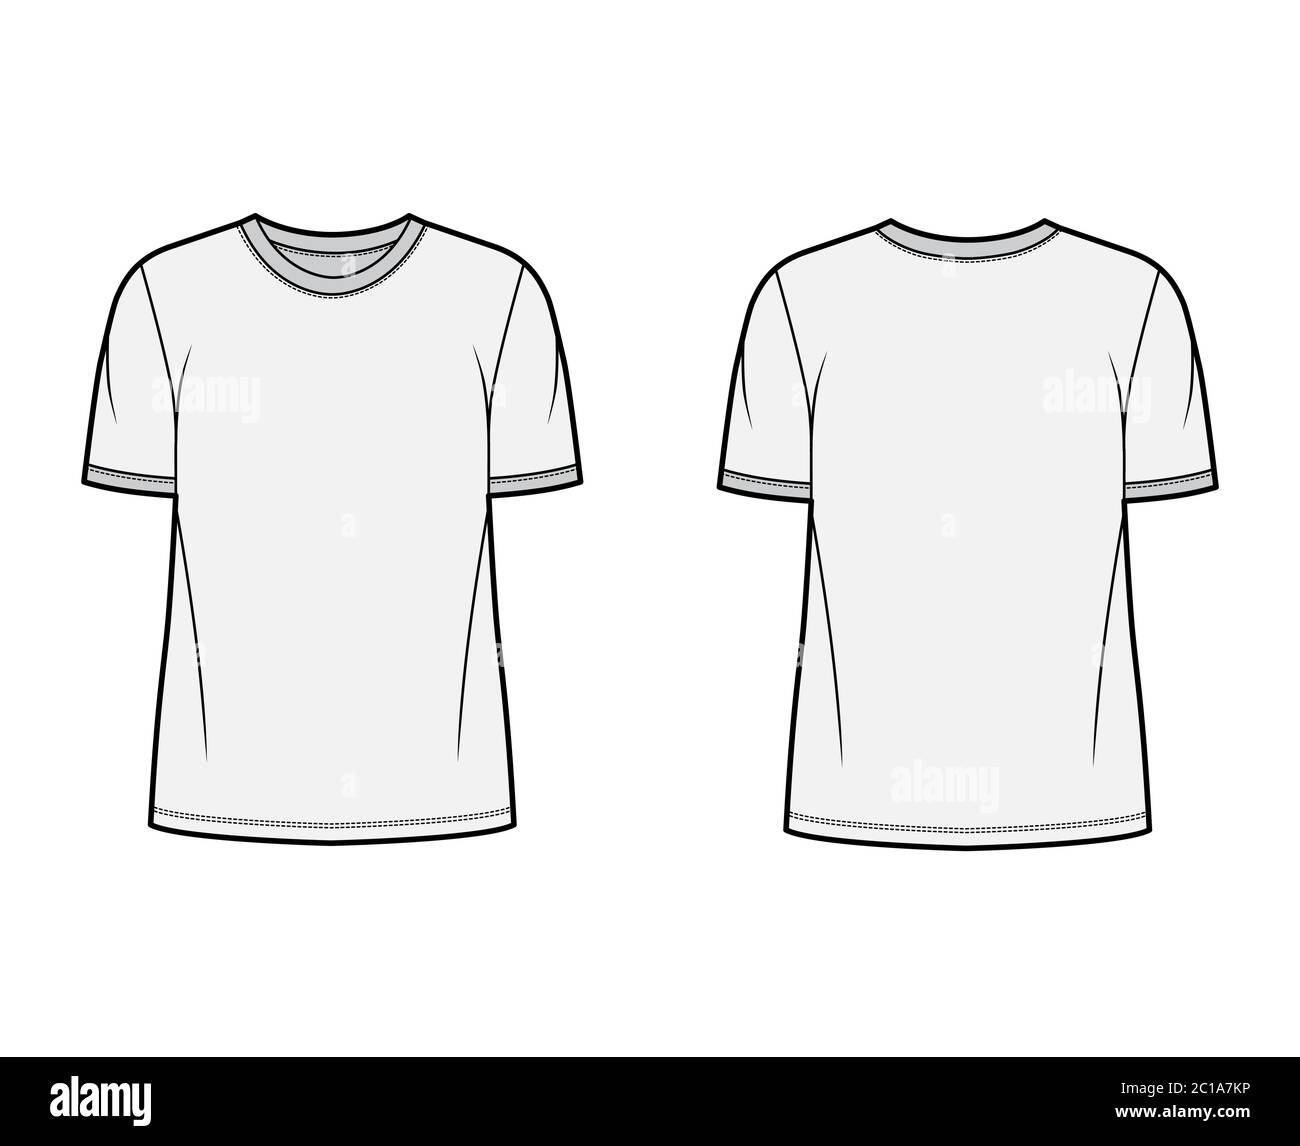 Download T Shirt Technical Fashion Illustration With Crew Neck Fitted Oversized Body Short Sleeves Flat Style Apparel Template Front And Back Grey Color Women And Men Unisex Garment Mockup For Designer Stock Vector Image